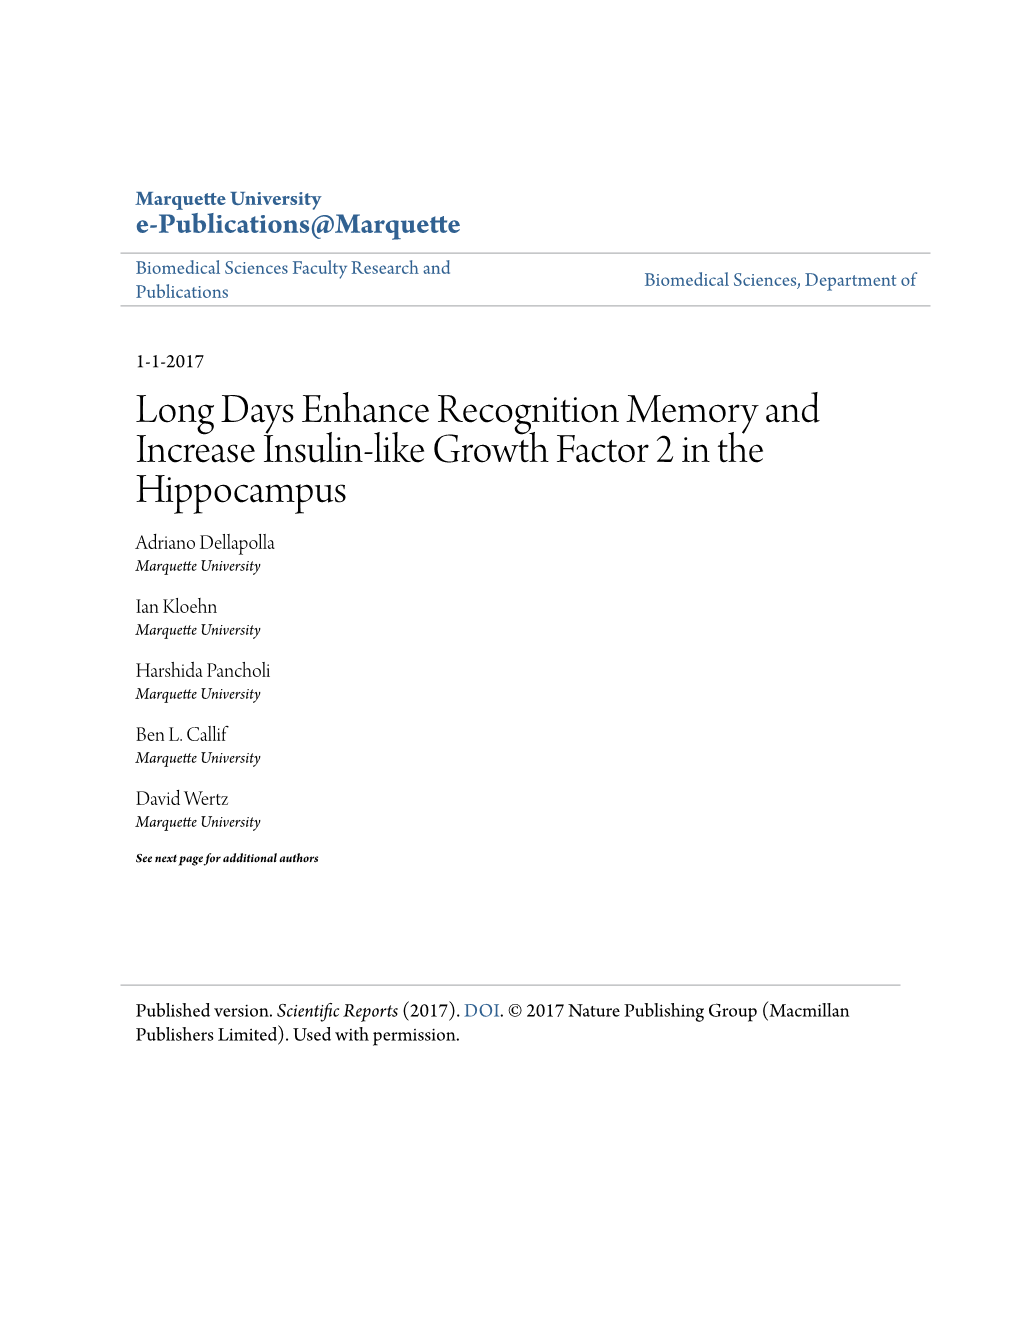 Long Days Enhance Recognition Memory and Increase Insulin-Like Growth Factor 2 in the Hippocampus Adriano Dellapolla Marquette University